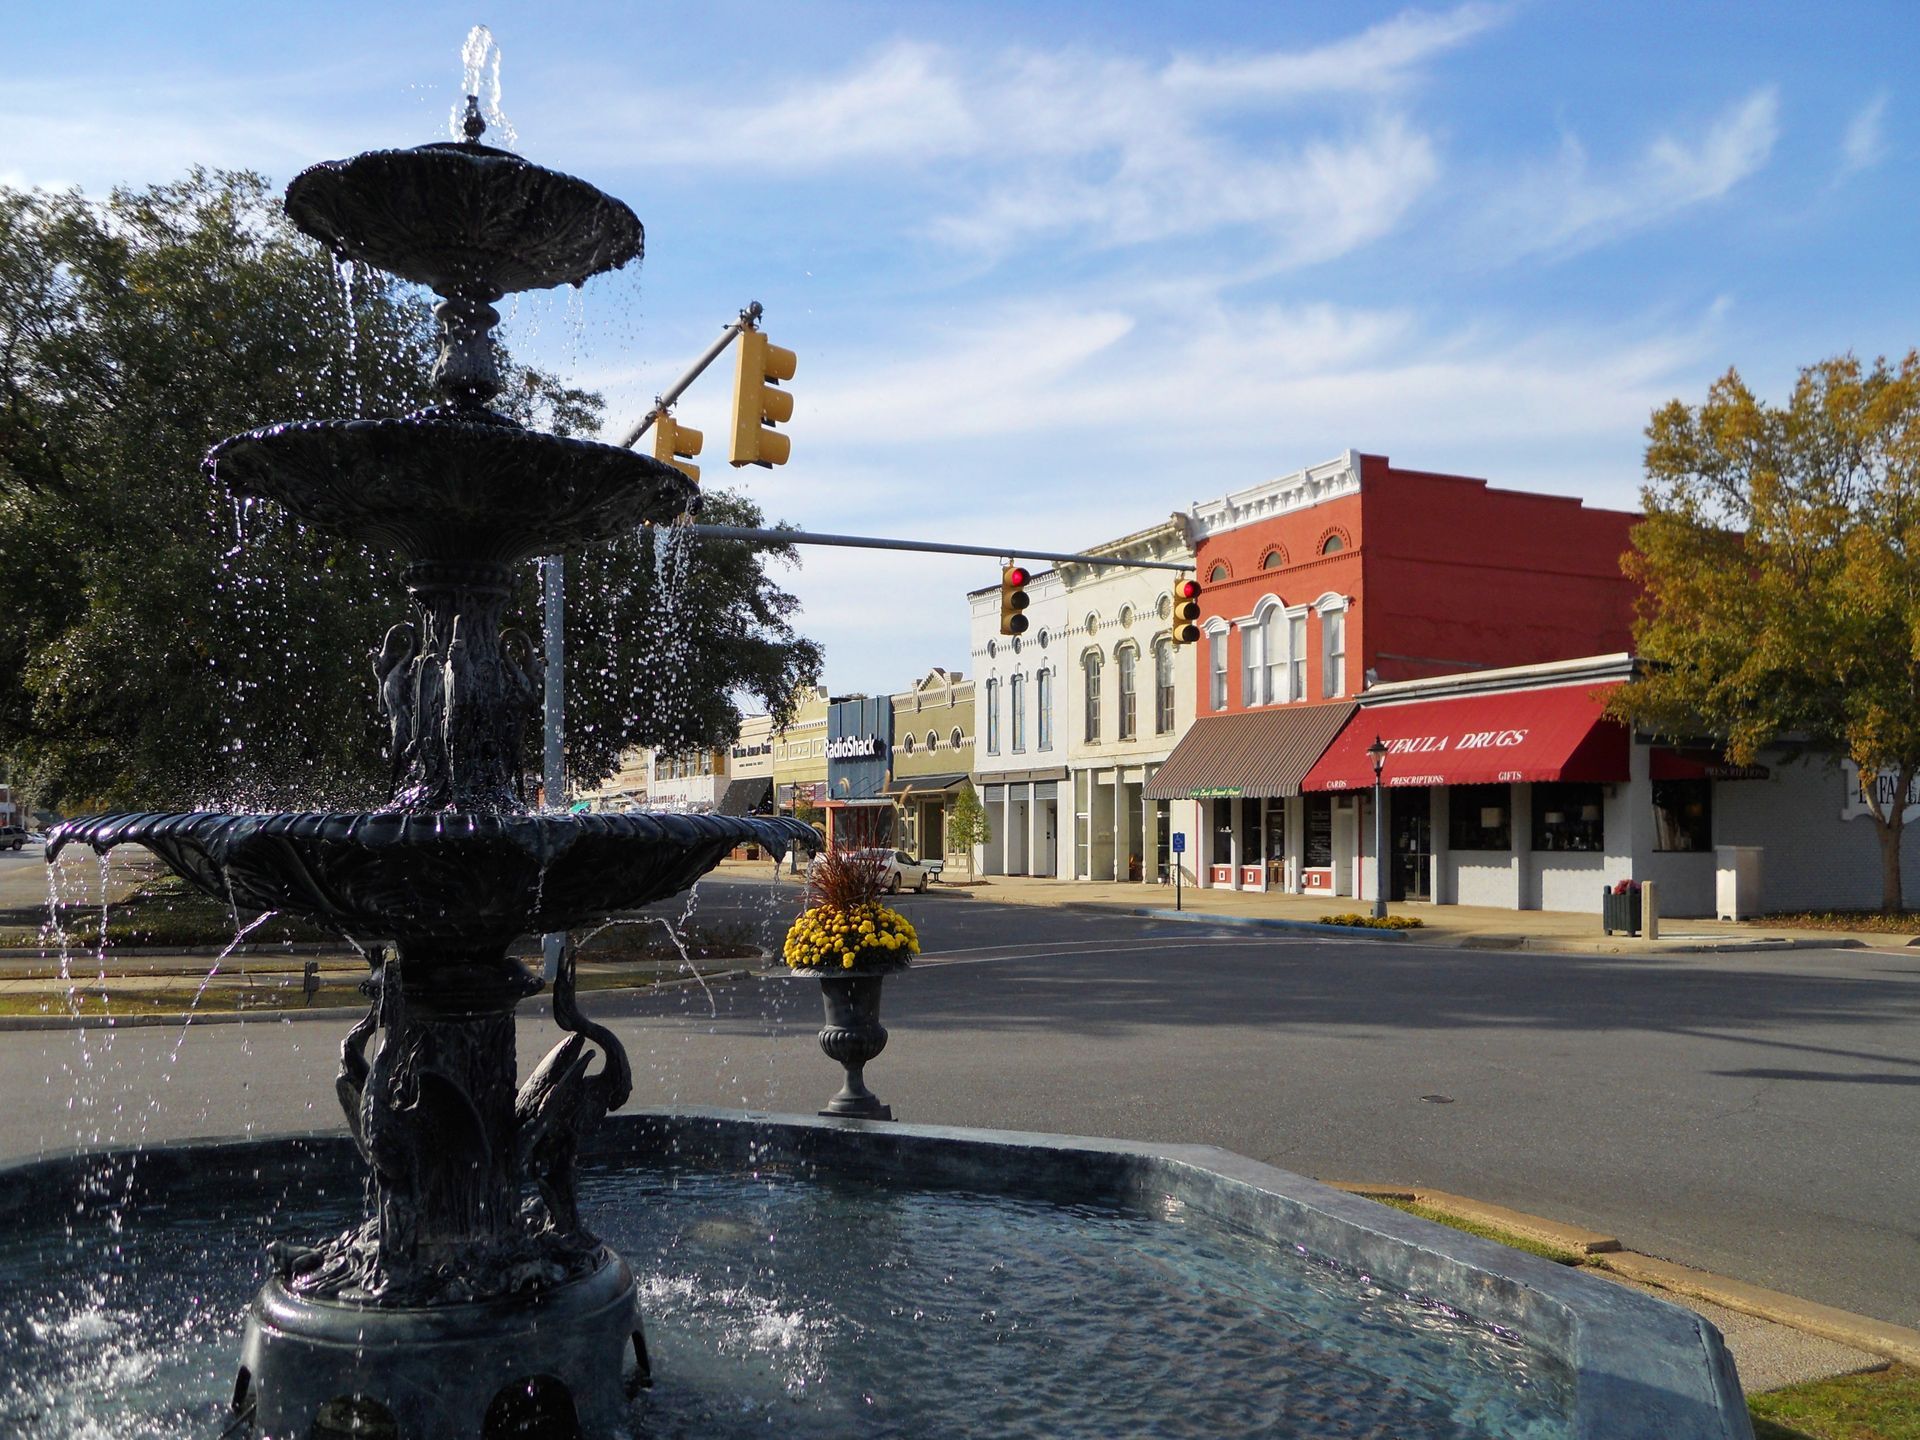 A fountain in the middle of a street in a small town